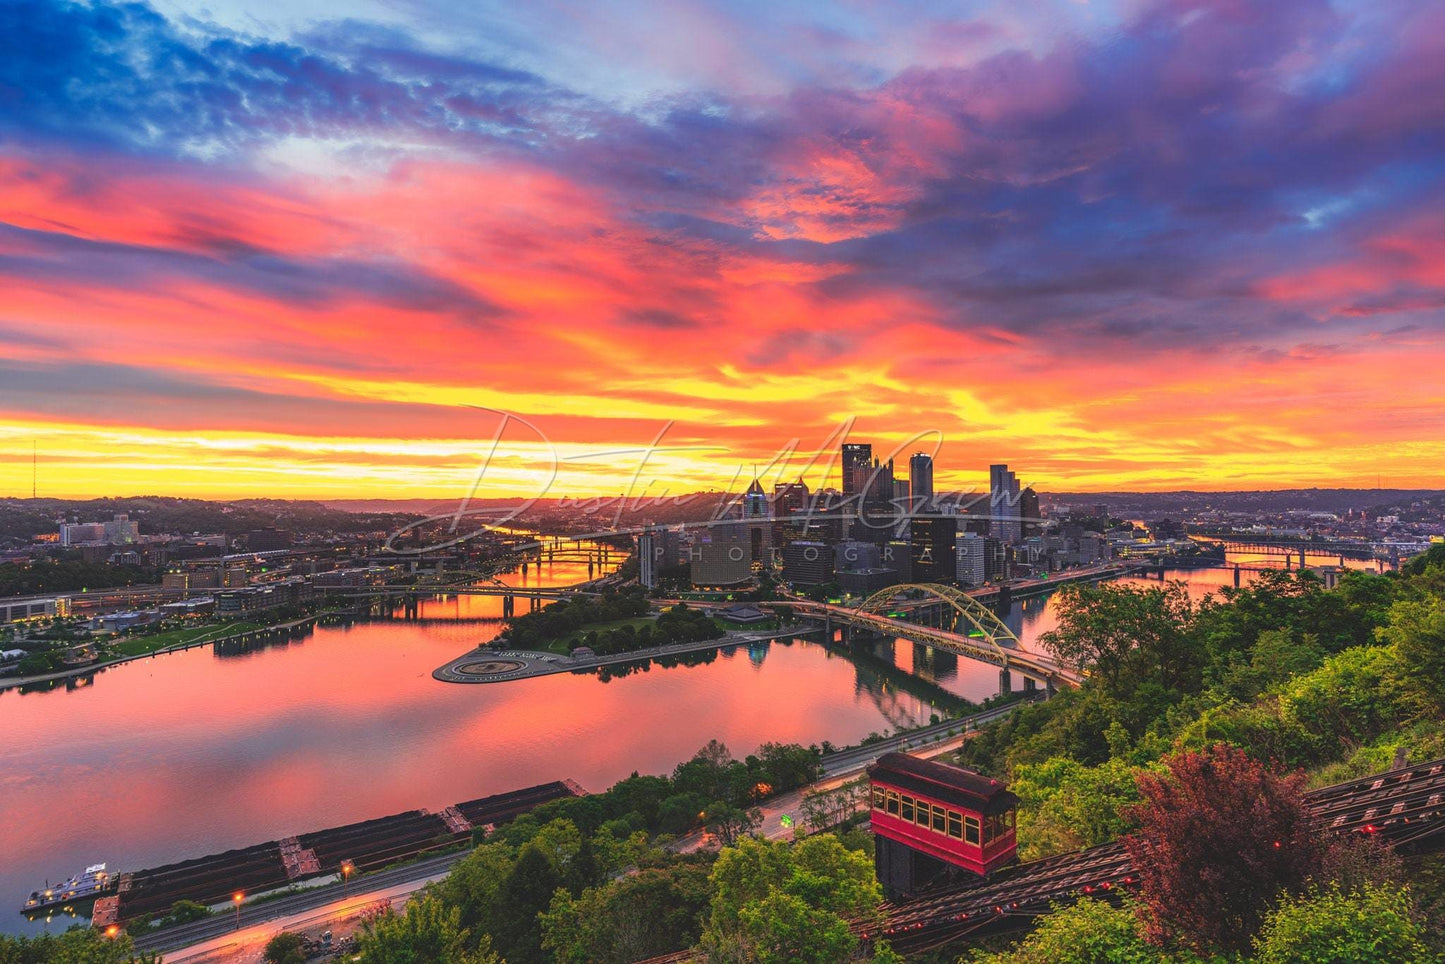 Pittsburgh Skyline And Incline Photo With Vibrant Sunrise